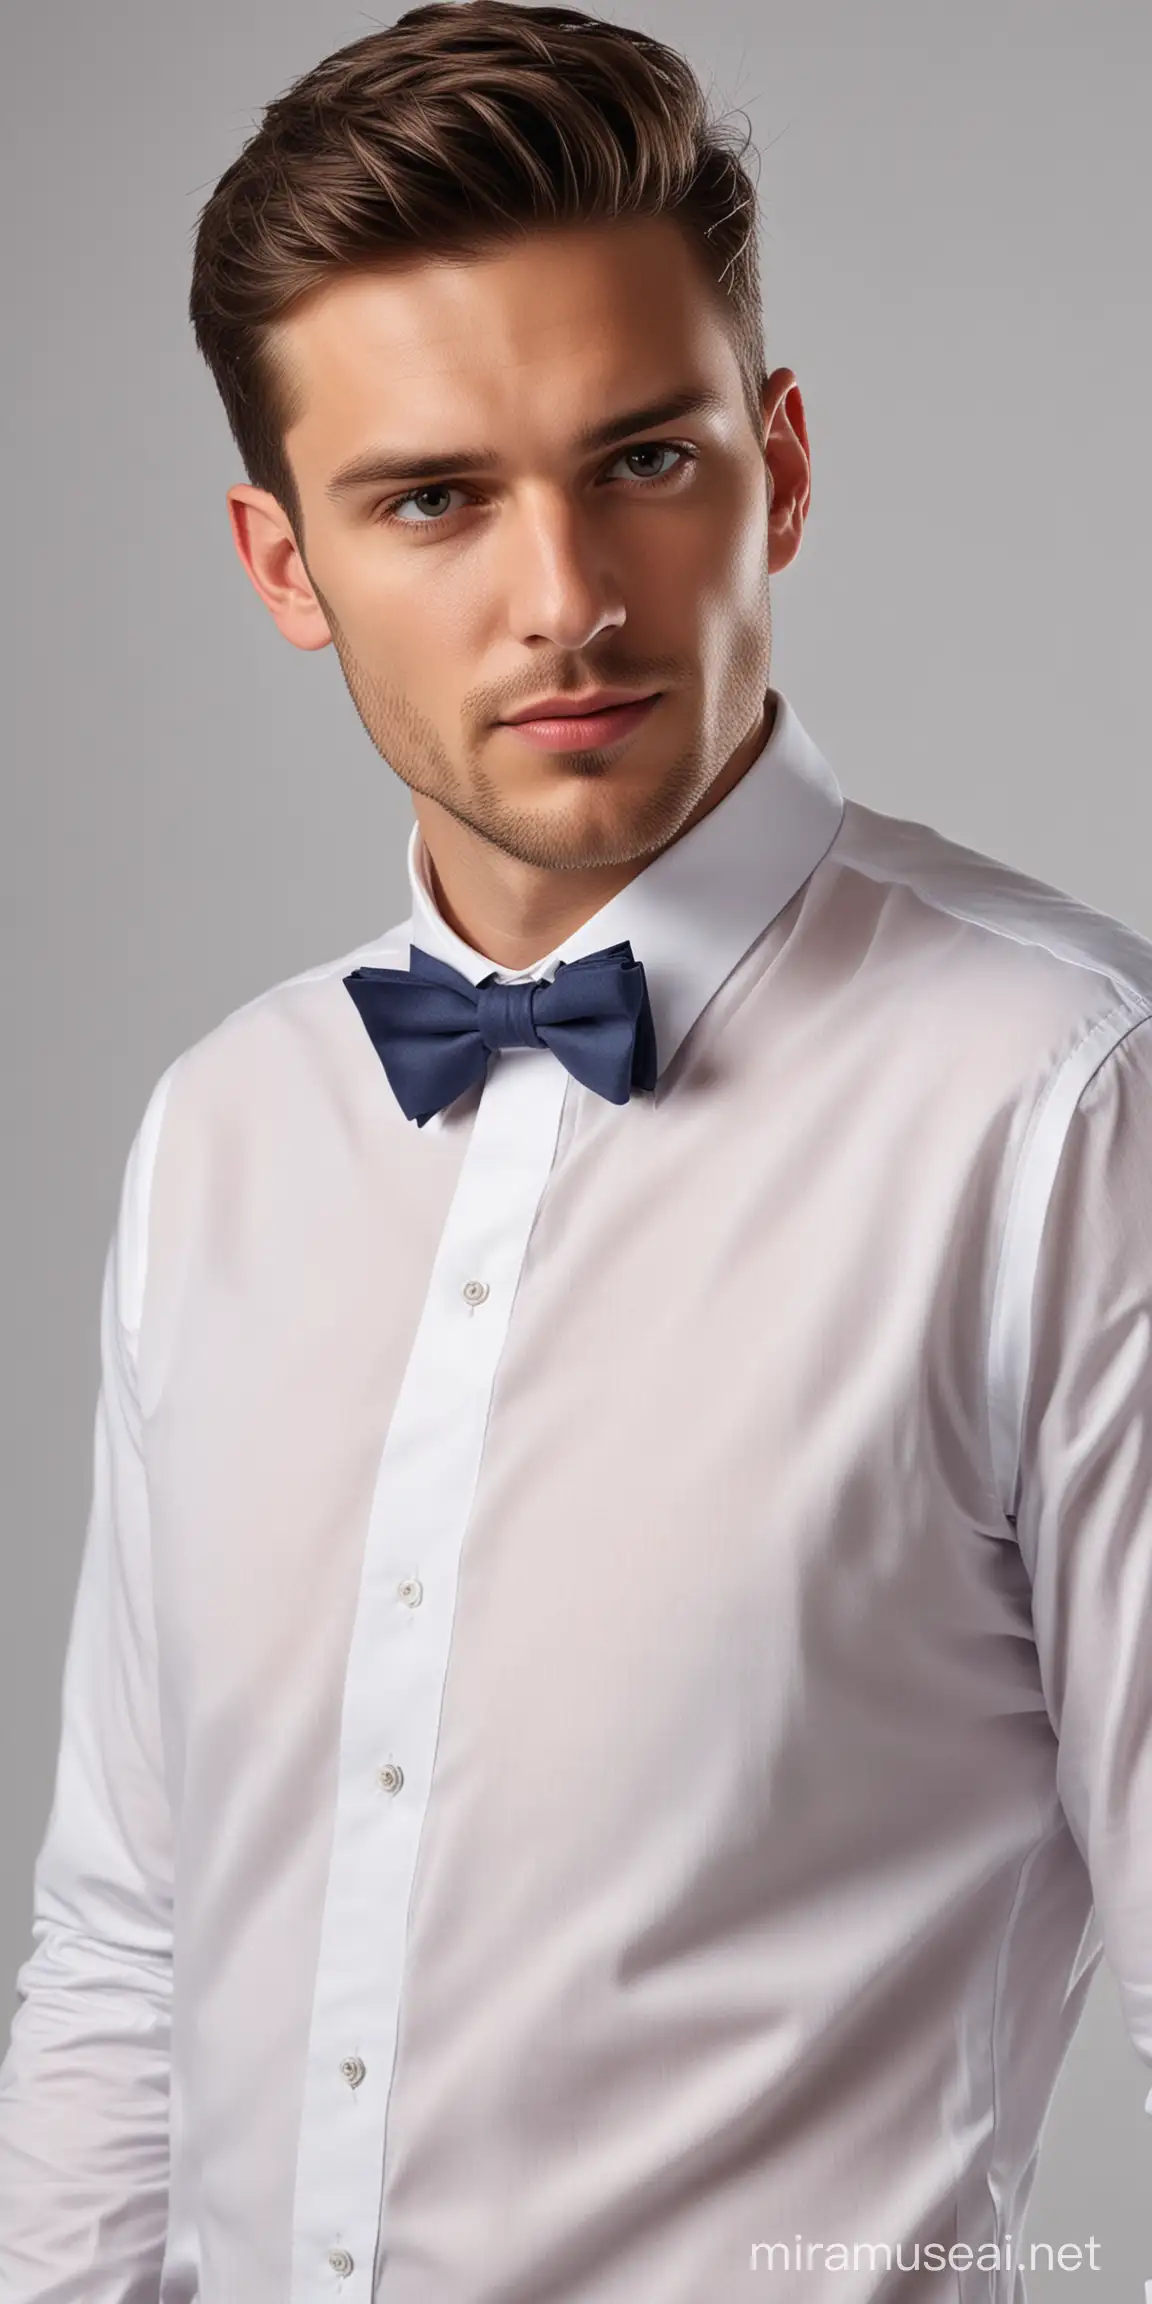 Professional Male Model Posing in Studio with White Shirt and Colorful Bow Tie